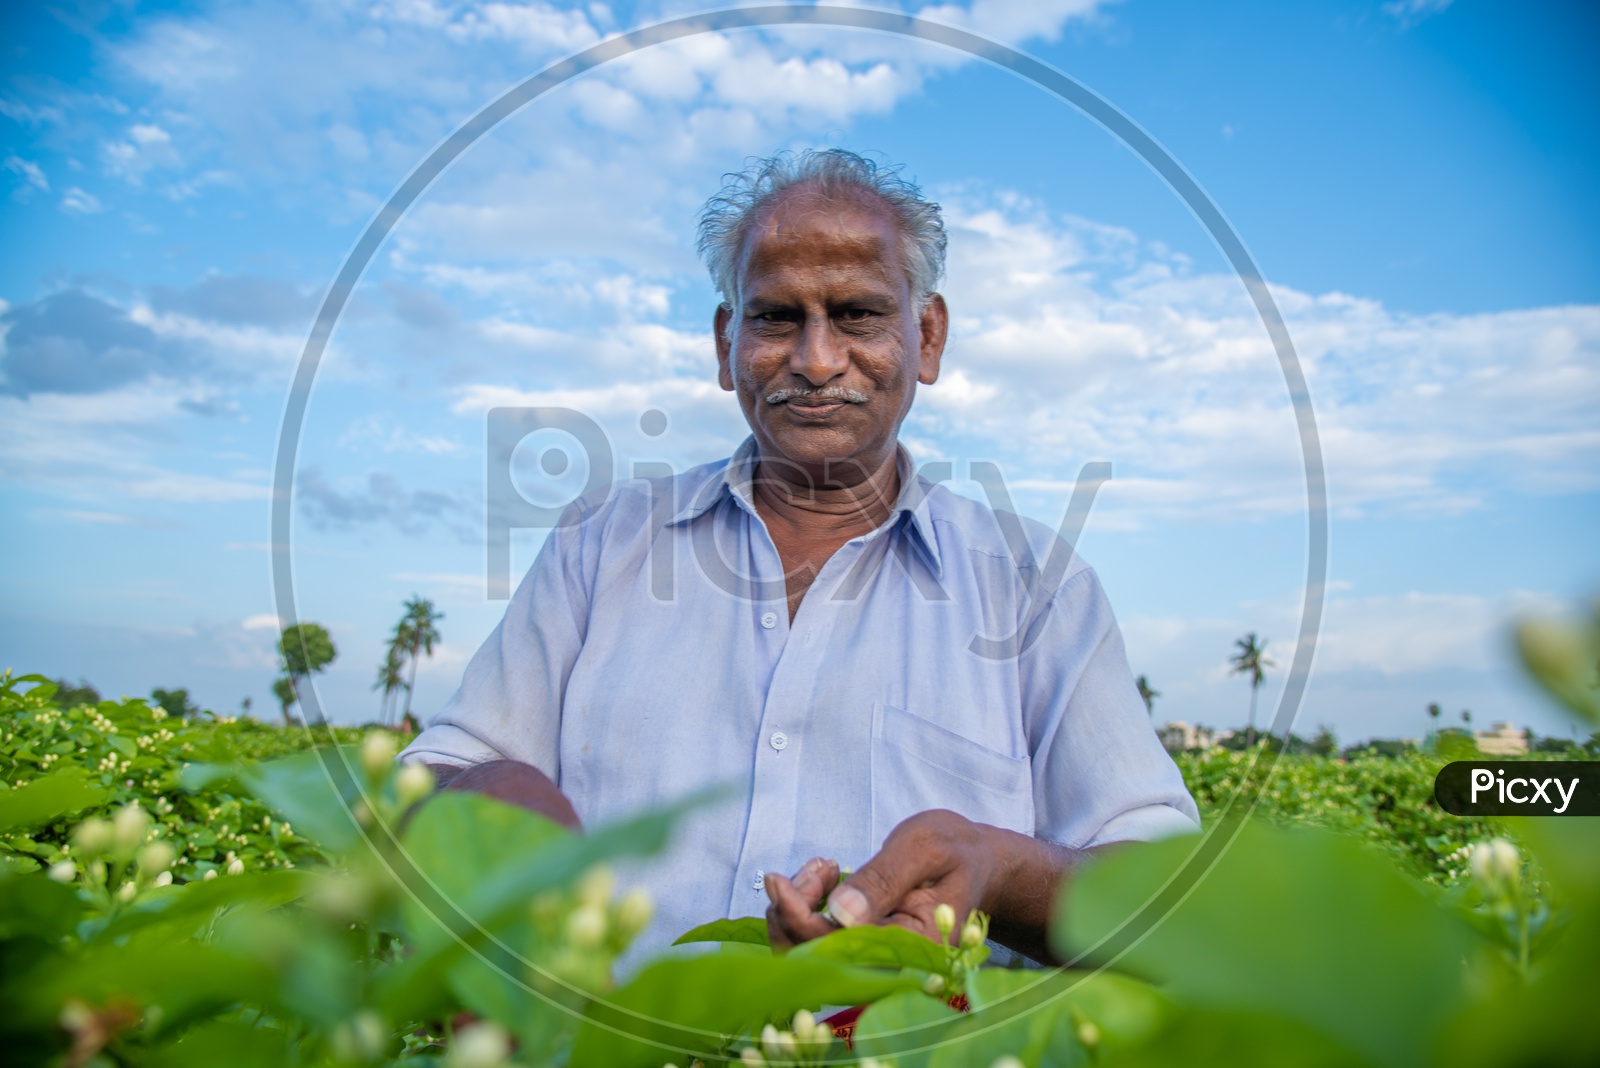 a smiling farmer plucking jasmine flowers from his field.